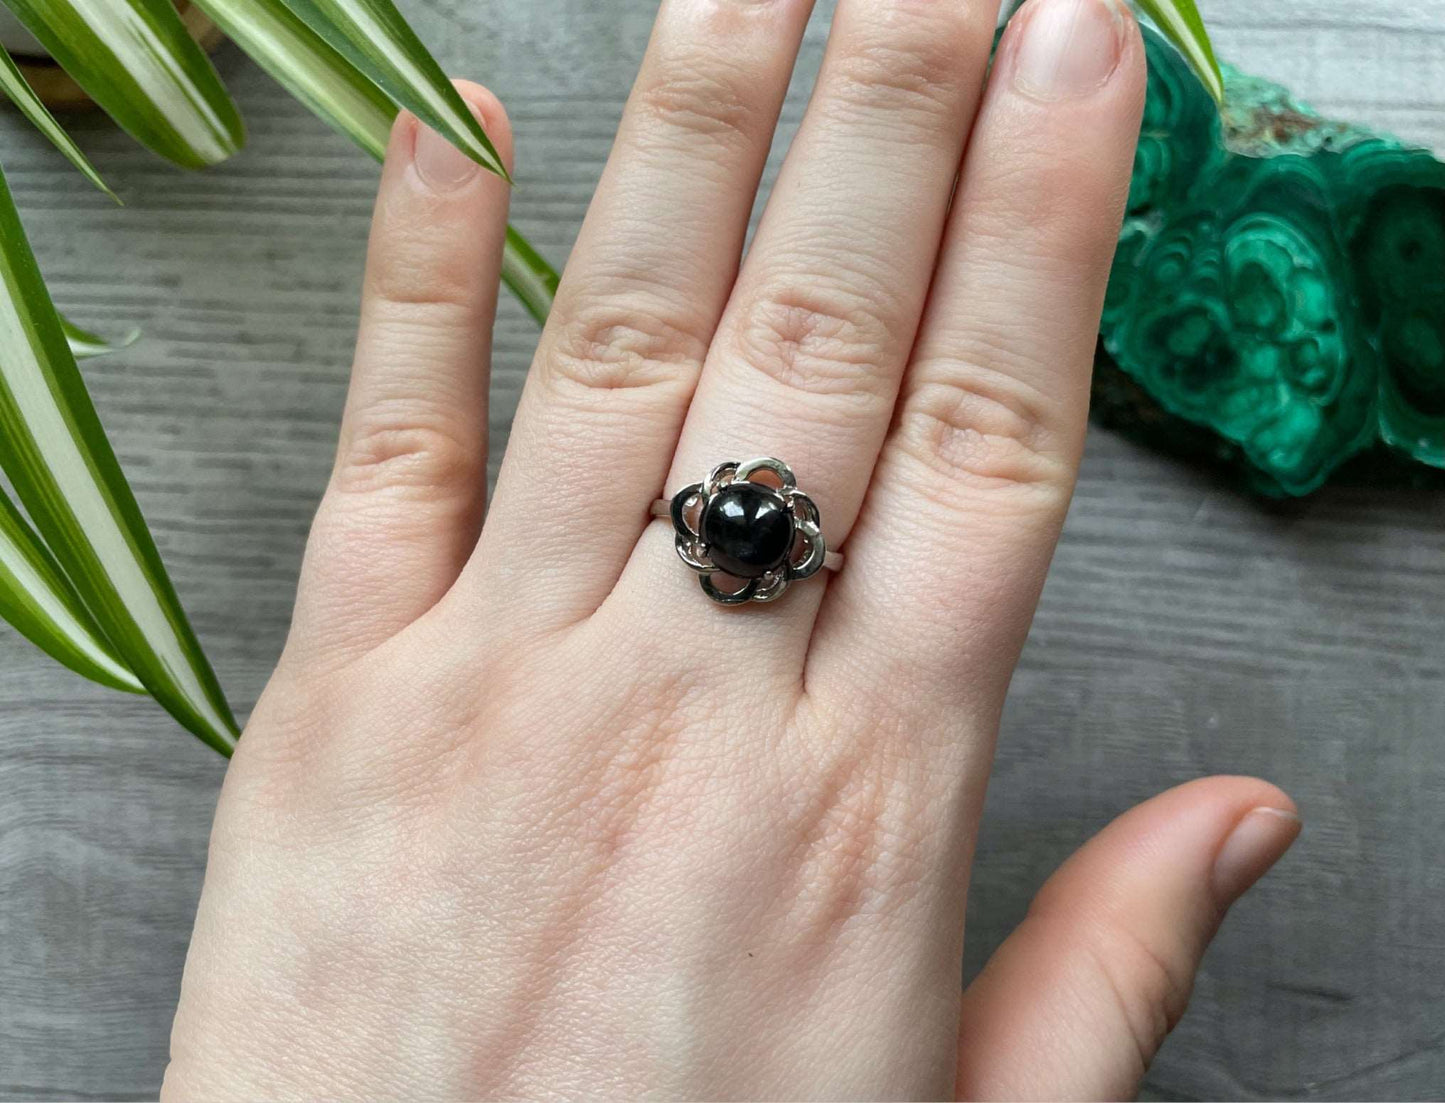 Pictured is a black star sapphire gemstone set in an S925 sterling silver ring.